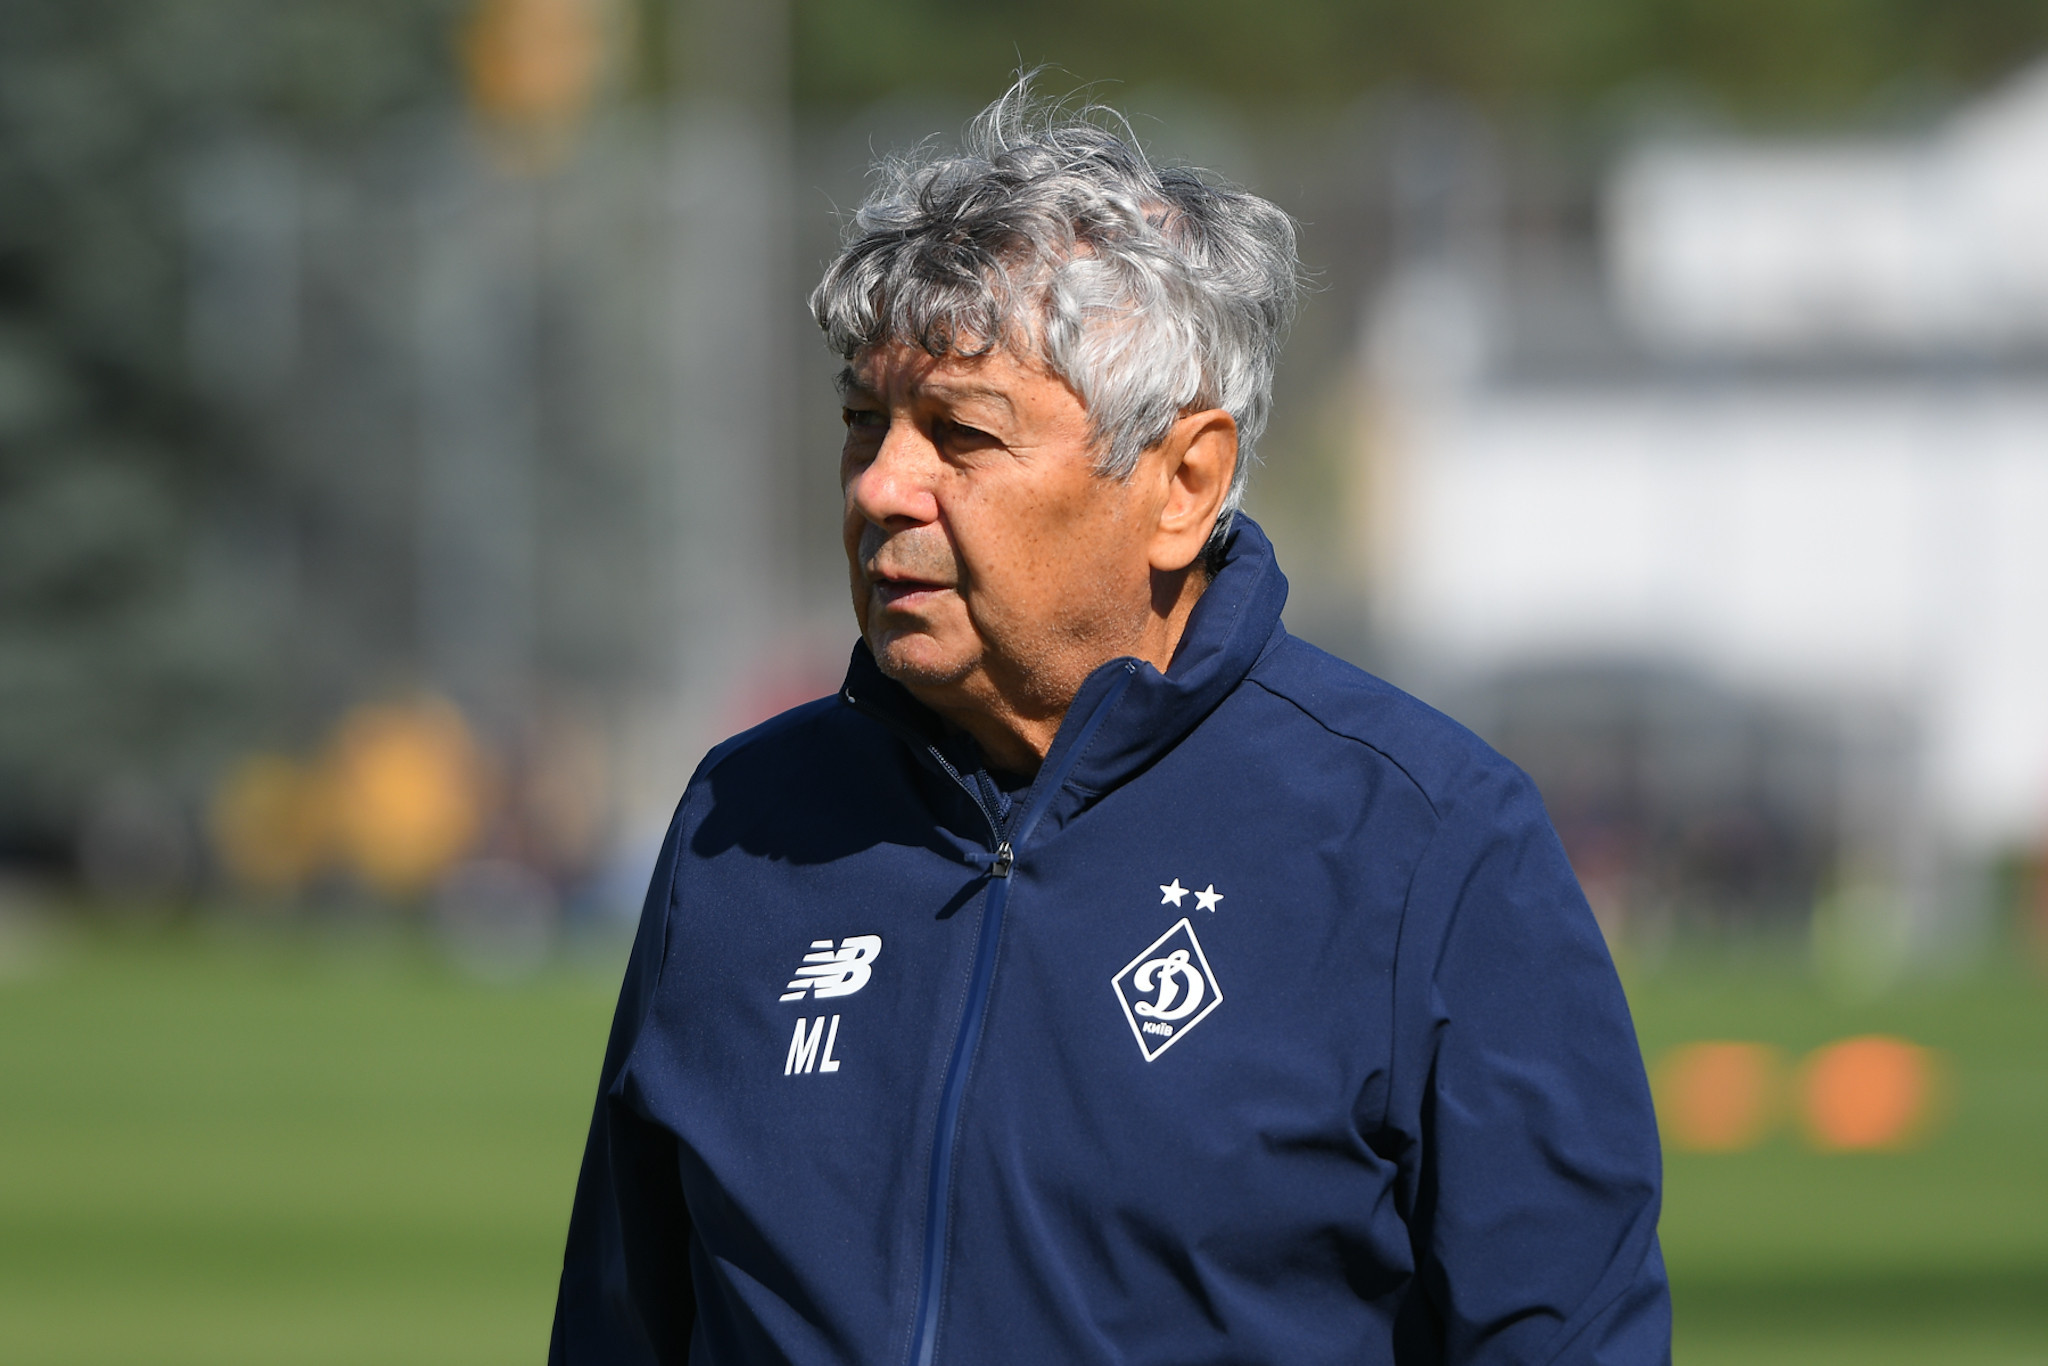 Press conference of Mircea Lucescu and Olexandr Karavayev before the game against Fenerbahce